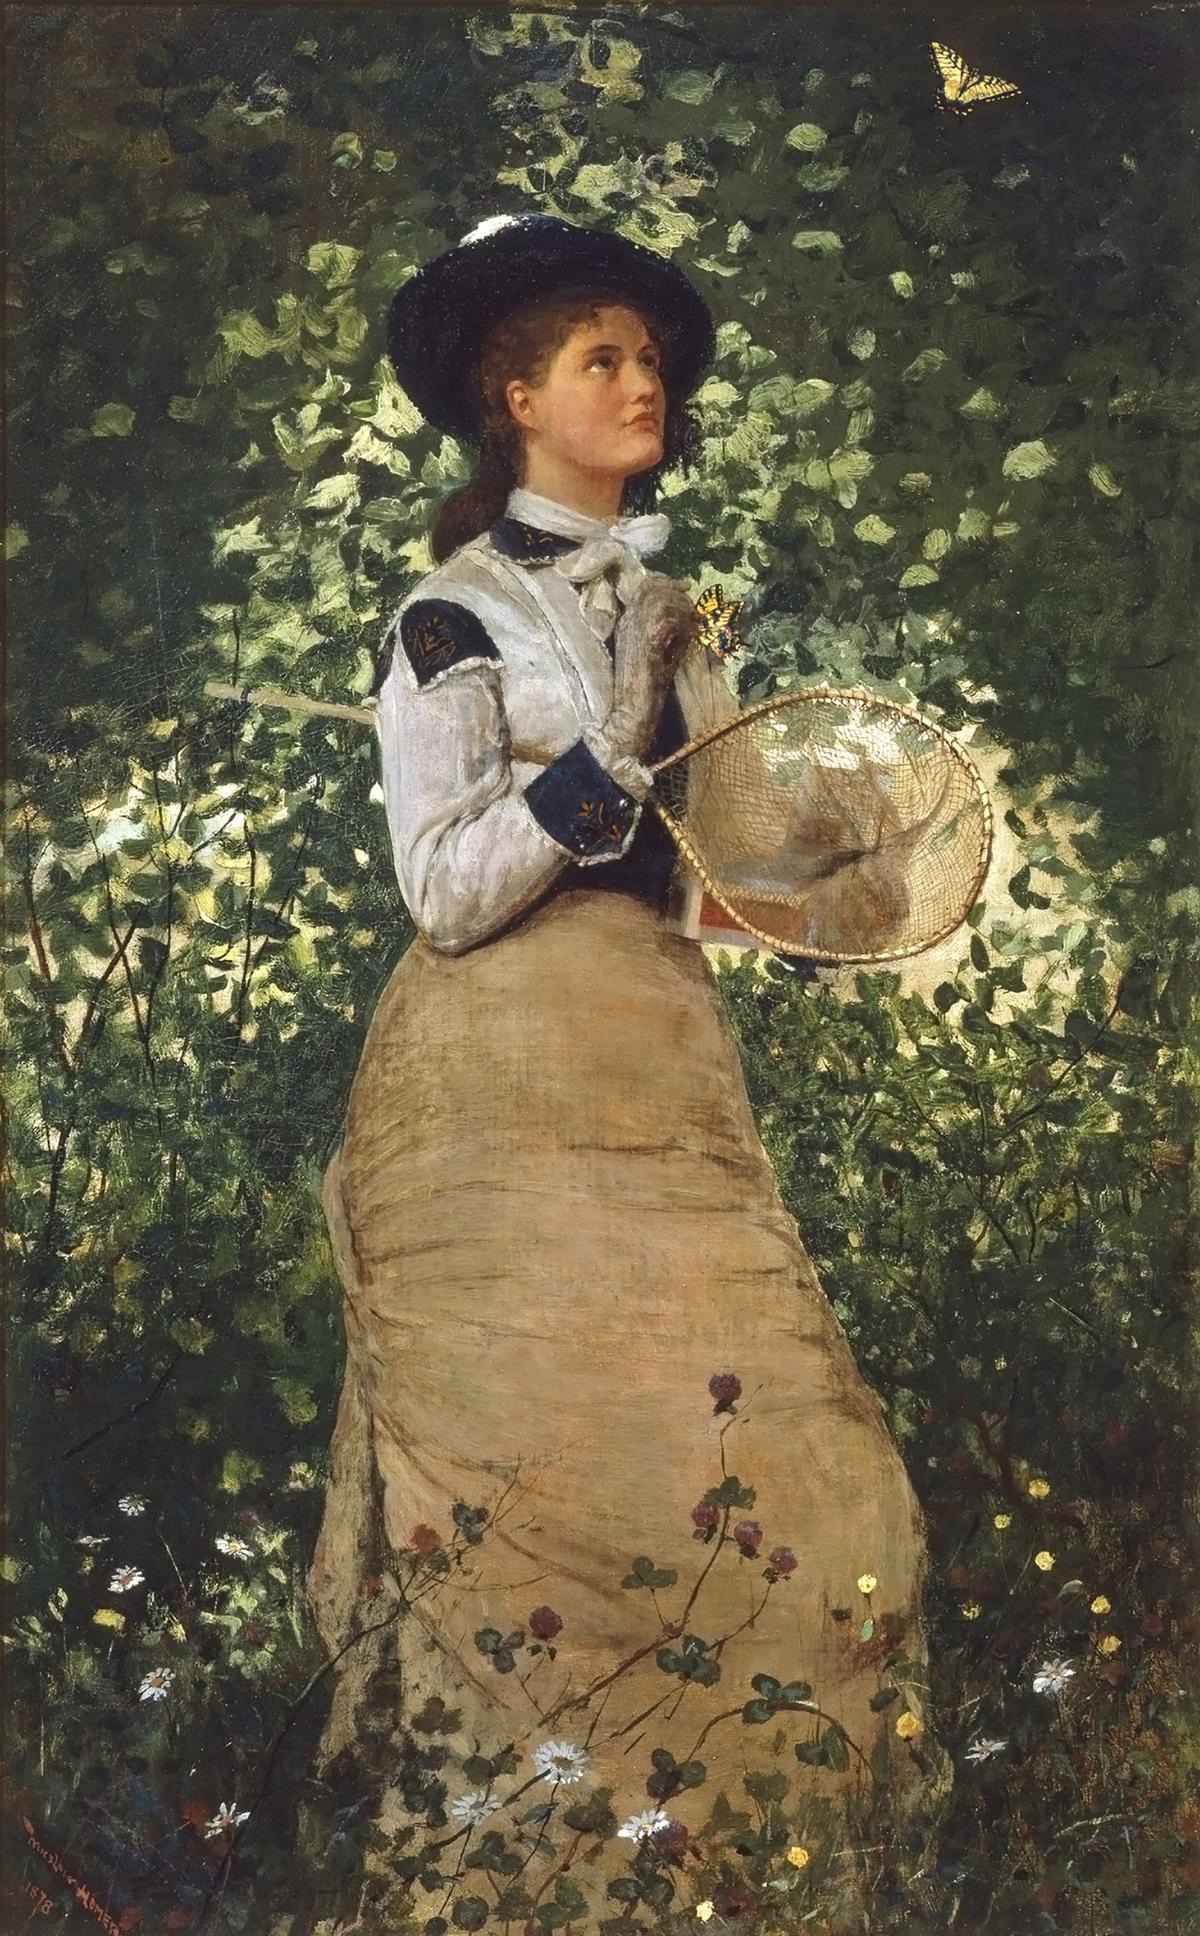 "Butterflies," 1878, by Winslow Homer. Oil on canvas. New Britain Museum of American Art, Connecticut. (Public Domain)